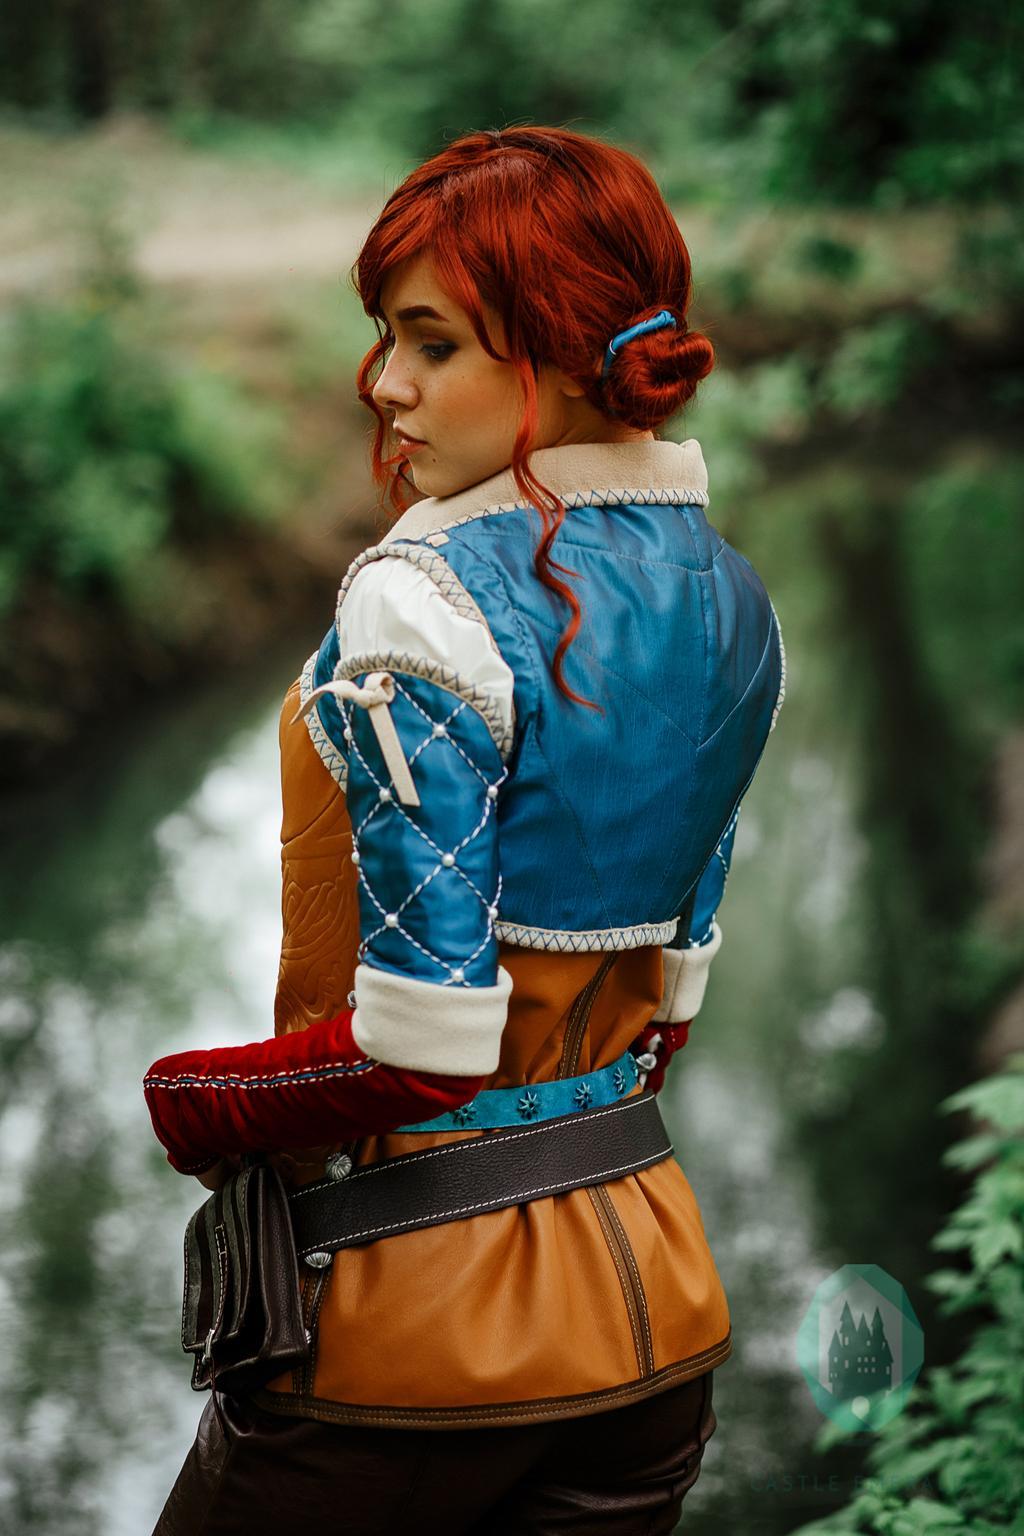 60+ Hot Pictures Of Triss Merigold From The Witcher Series Are Delight For Fans 10